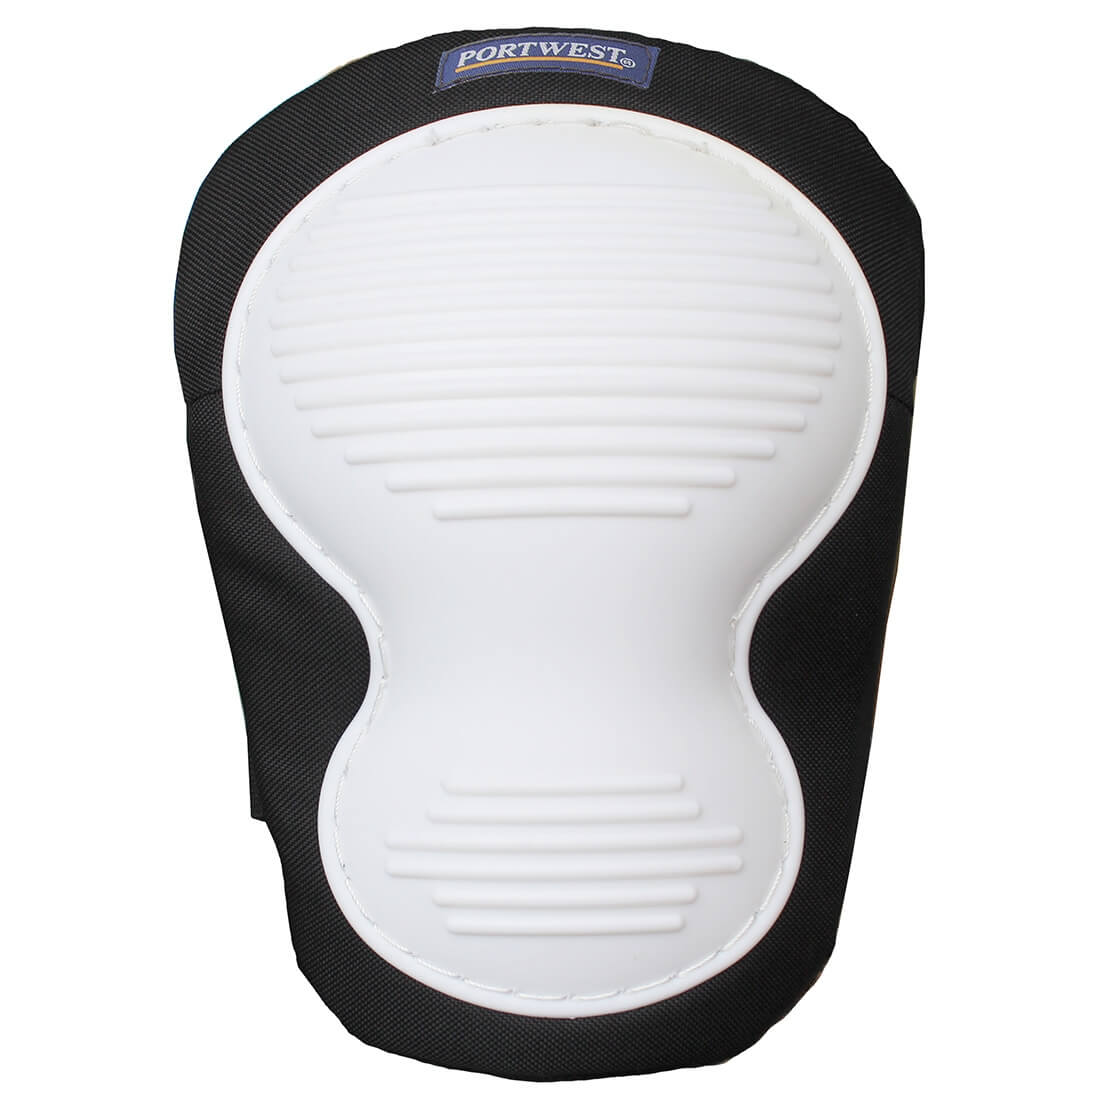 Non-Marking Knee Pad - Personal protection